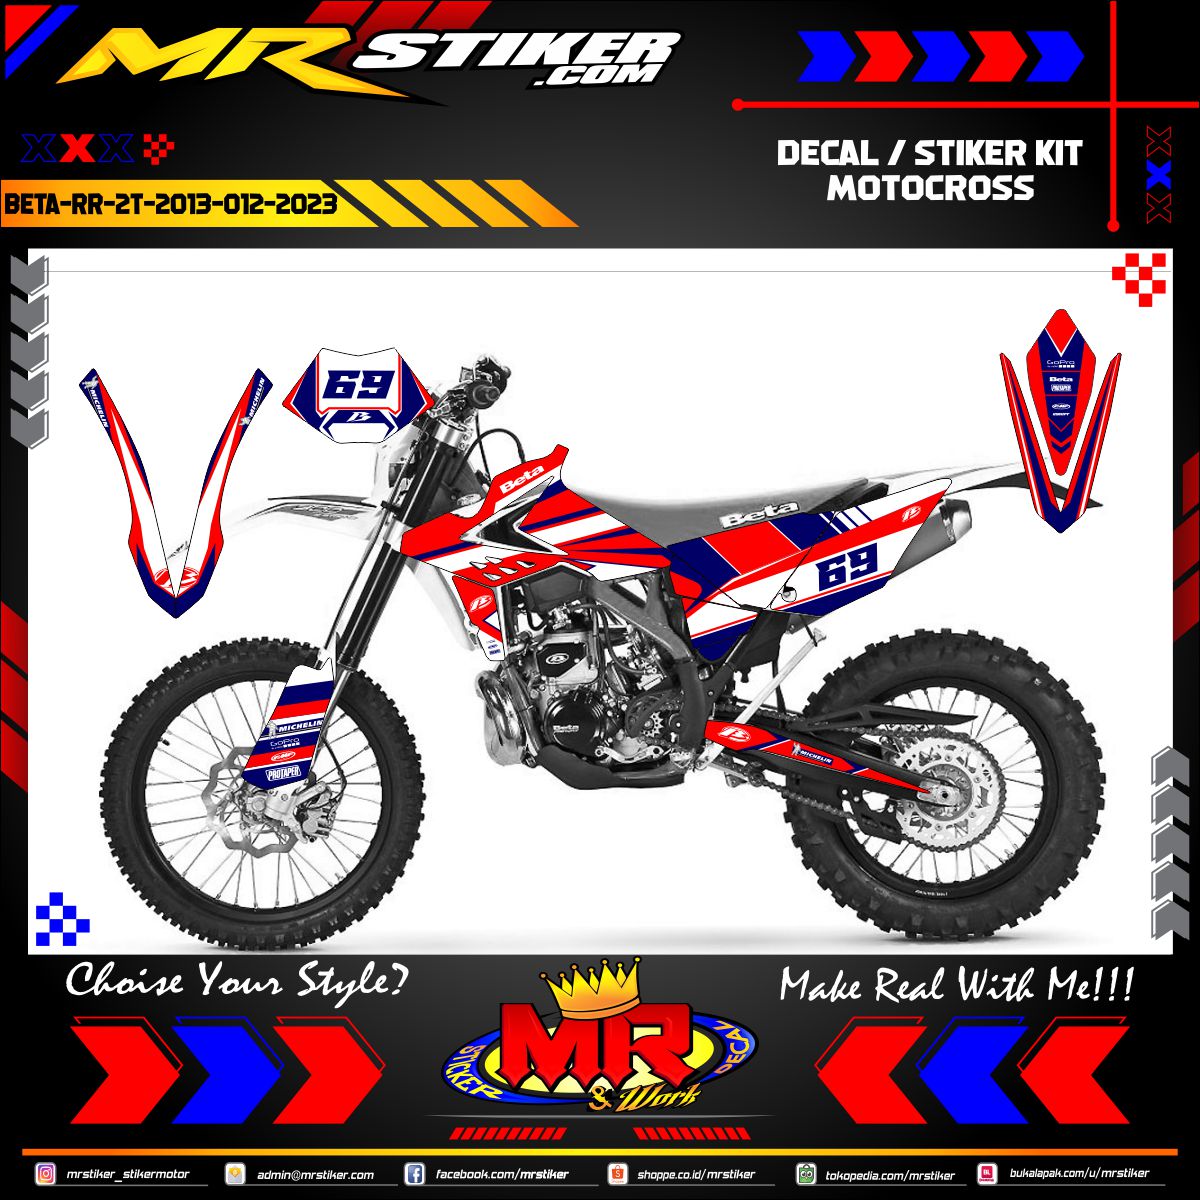 Stiker motor decal Motocross Beta RR 2T 2013 Red Blue Navy Line Cross Graphic Decal Kit